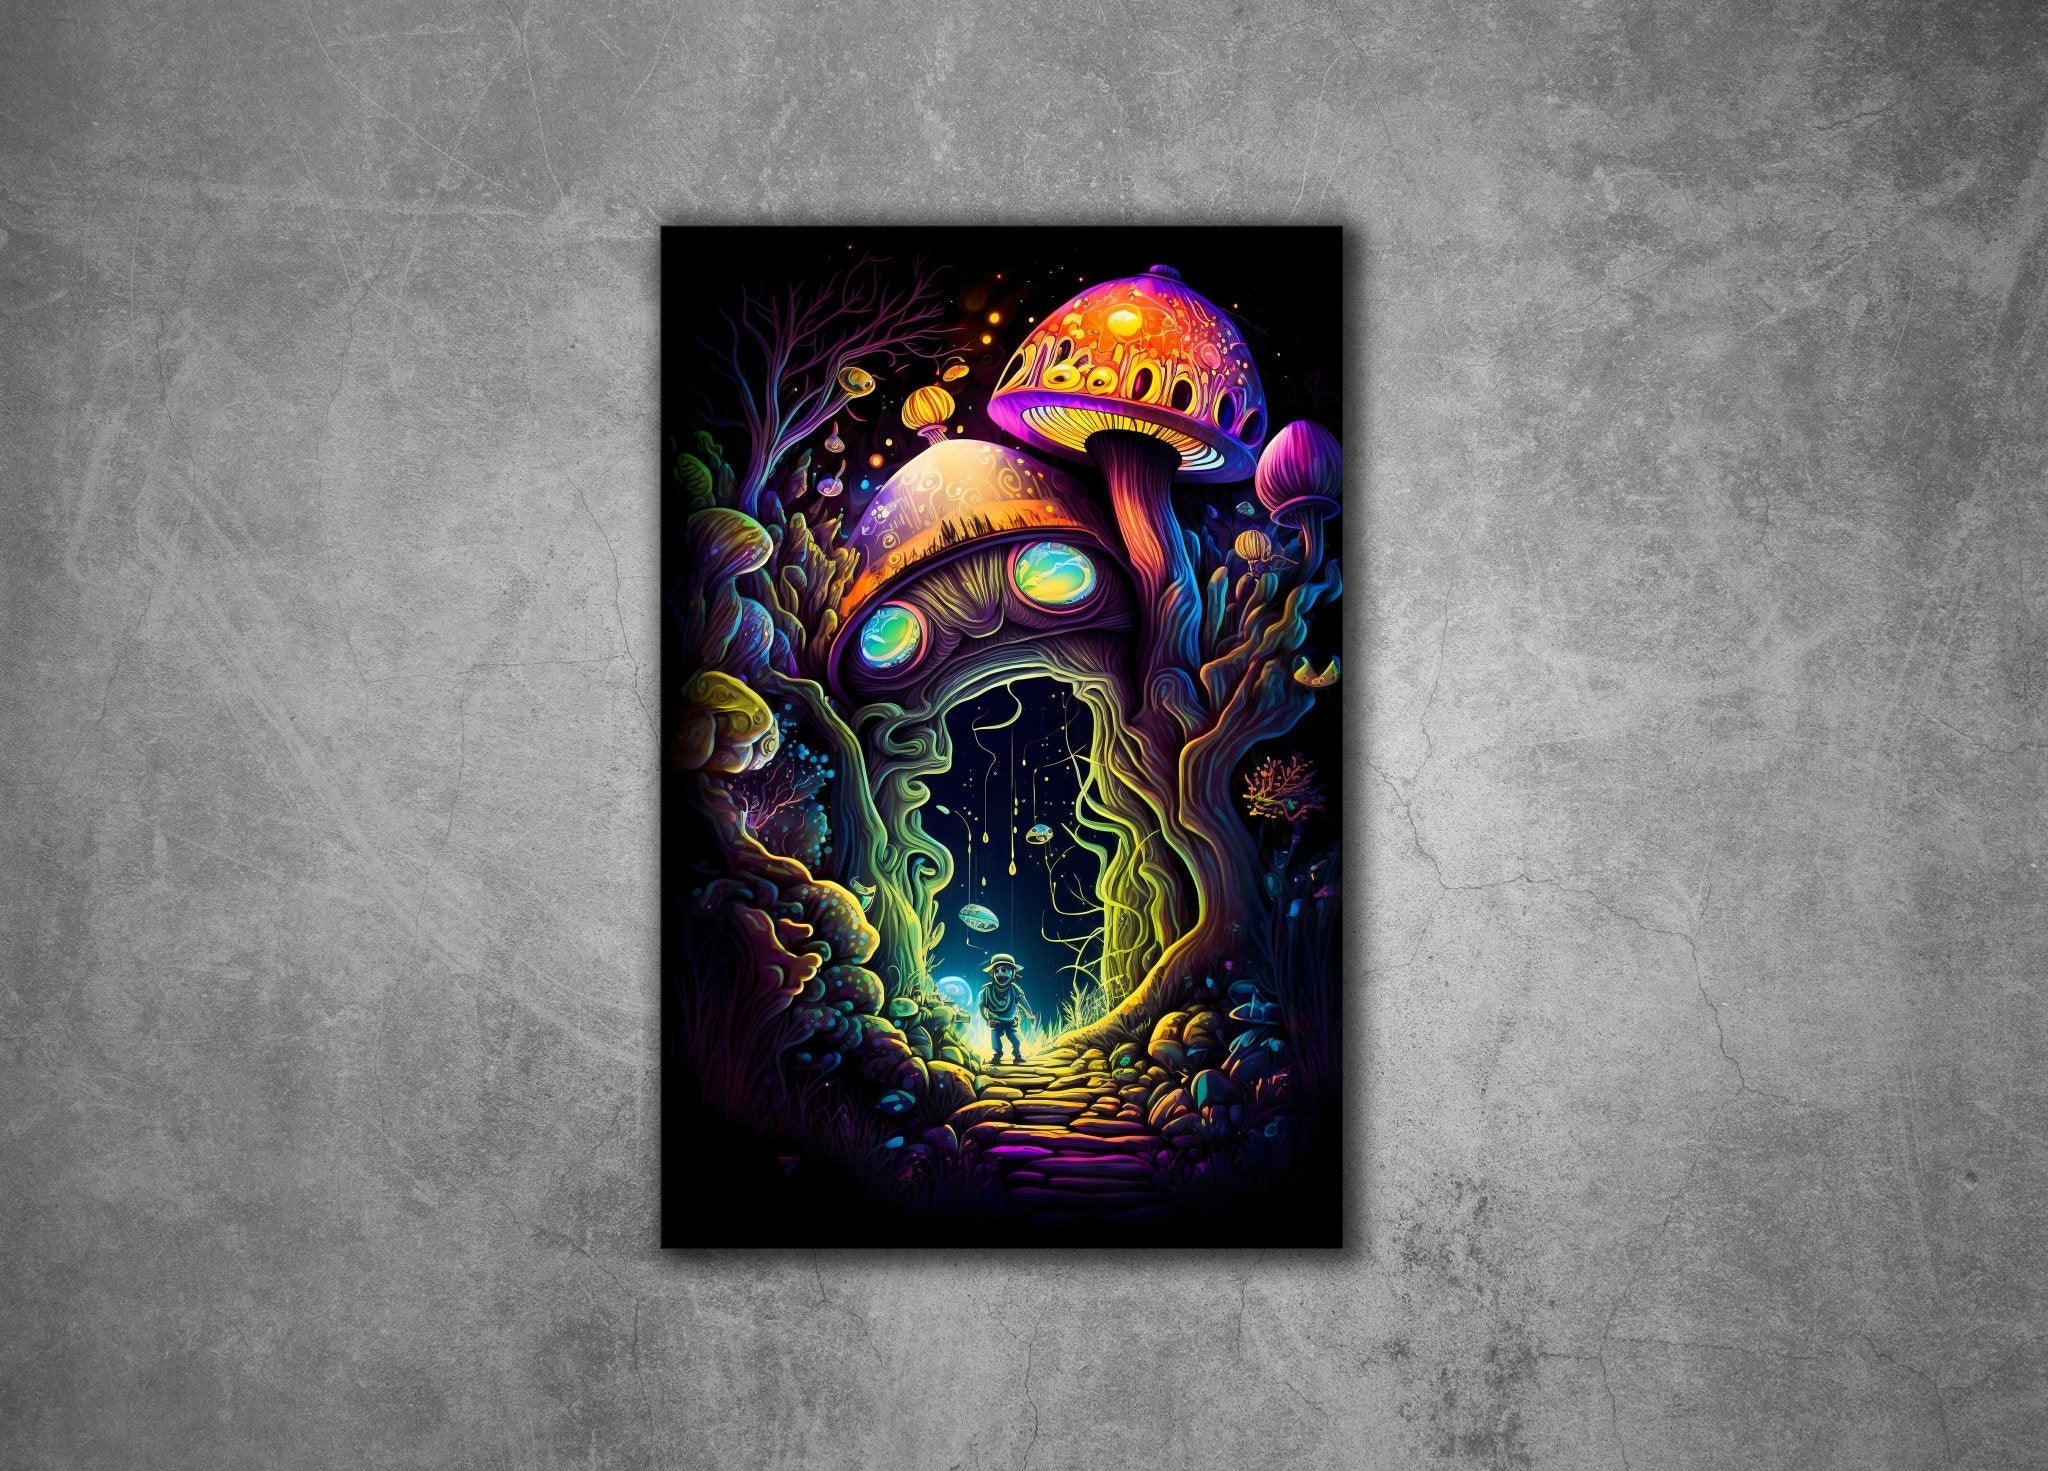 Trippy Psychedelic Abstract Wall Art | Surreal Magic Mushroom Forest Fantasy Illustration - Vivid Roads